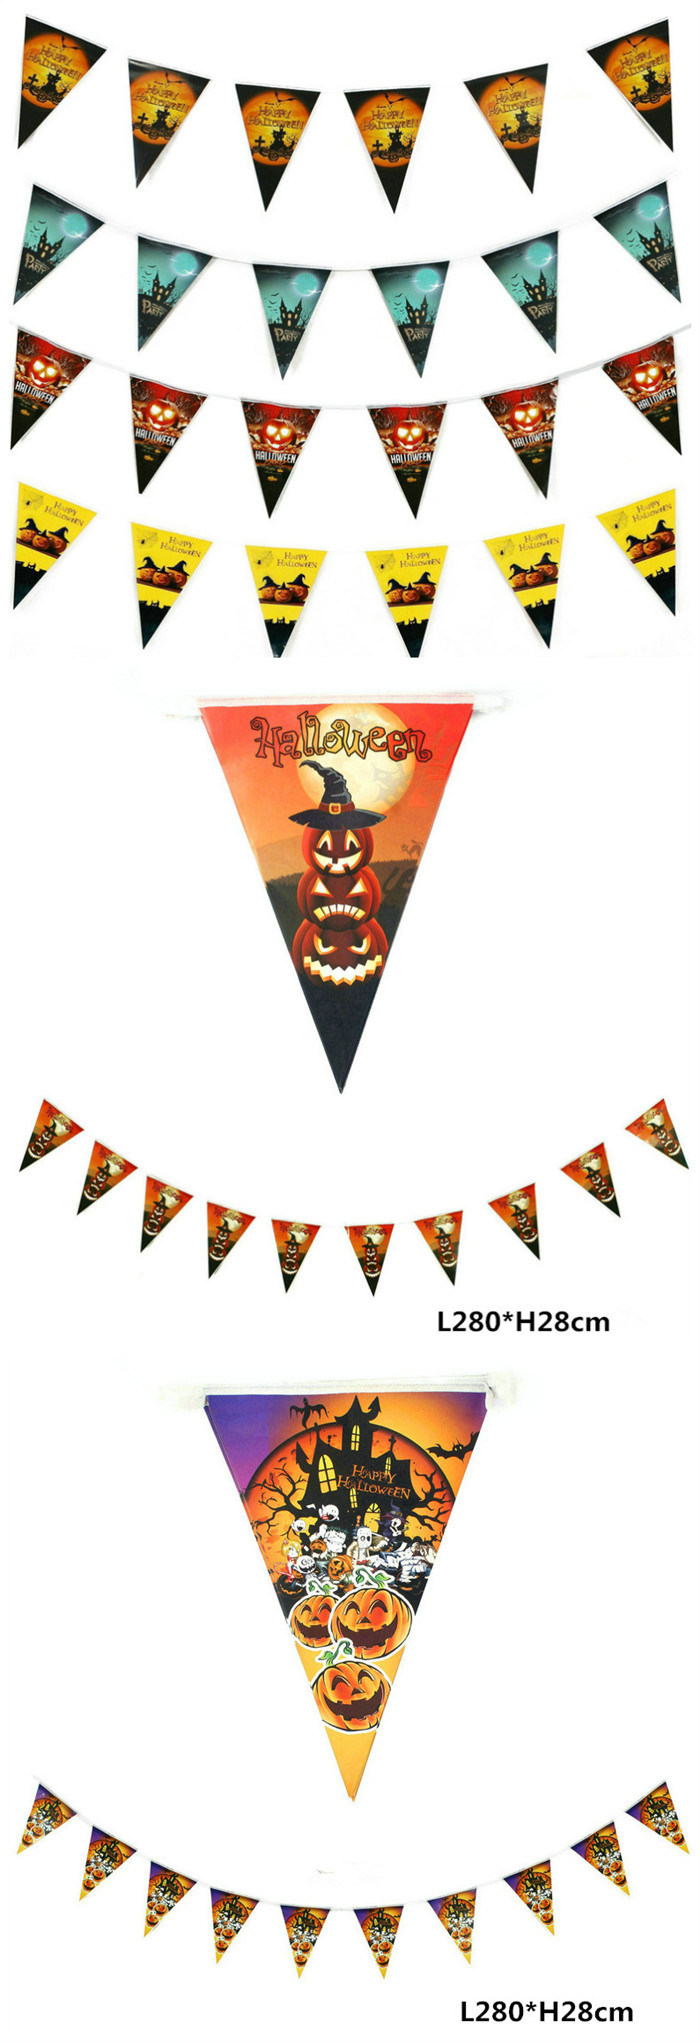 Triangle Pennant Paper Buntings Garland for House Party Decoration